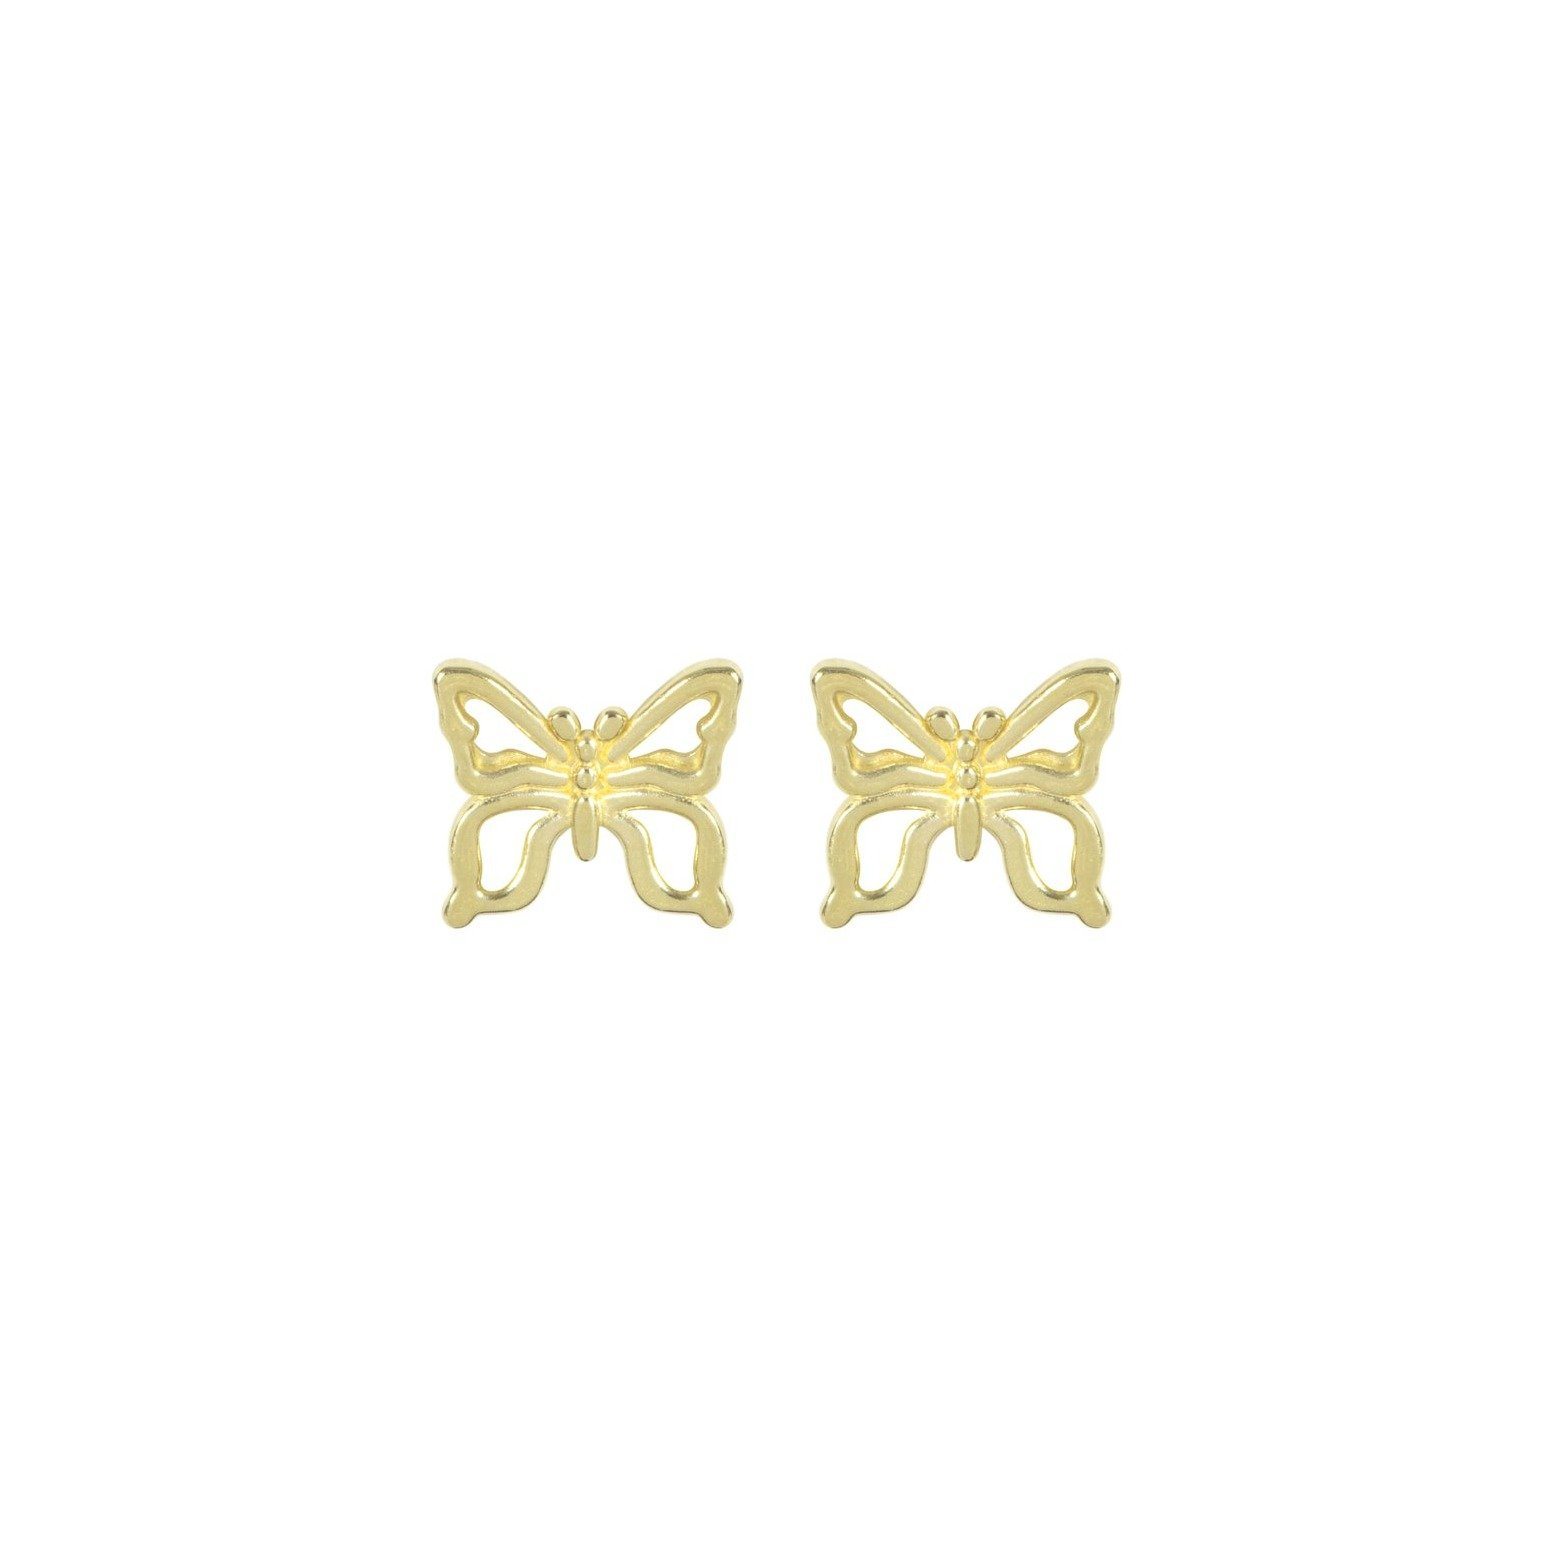 Butterfly Stud Earrings handmade in California by Katie Dean Jewelry. Butterflies are a symbol of Spring and new beginnings with the change of seasons. Nickel free and hypoallergenic.